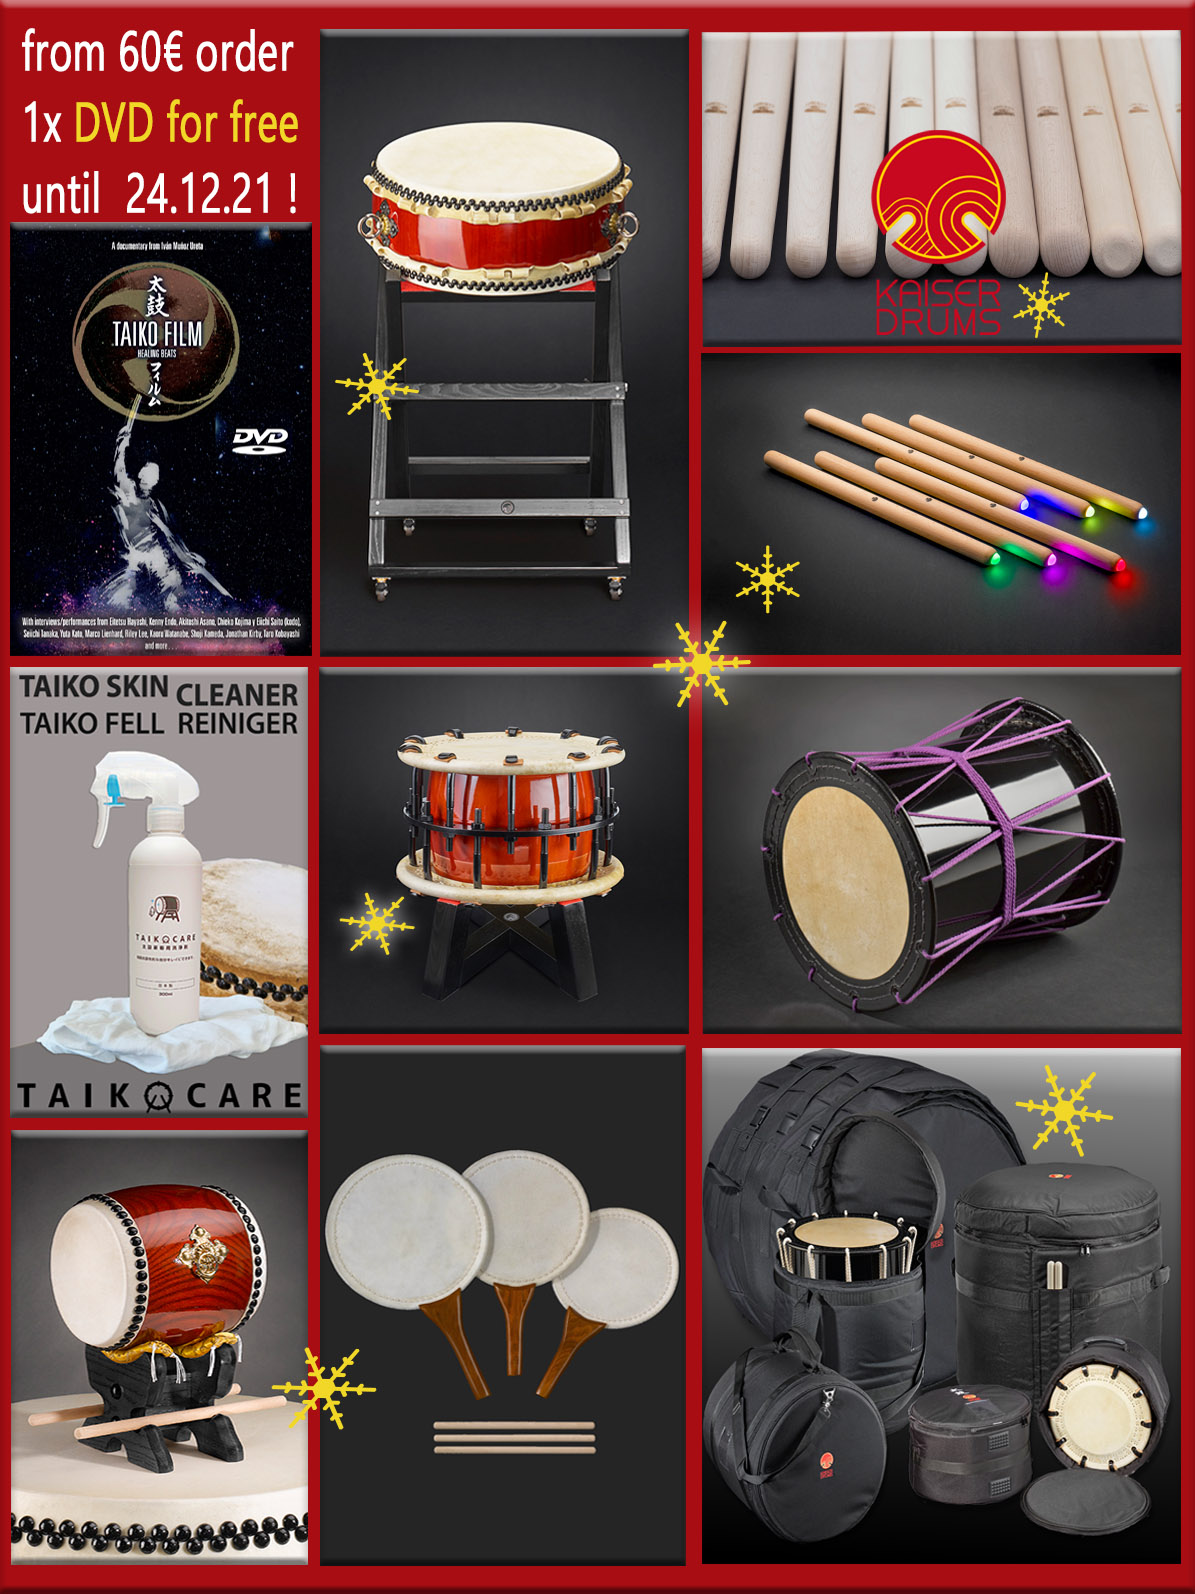 Special Taiko christmas gift / cadeau / regalo / Geschenk at KAISER DRUMS until 24.12.2021